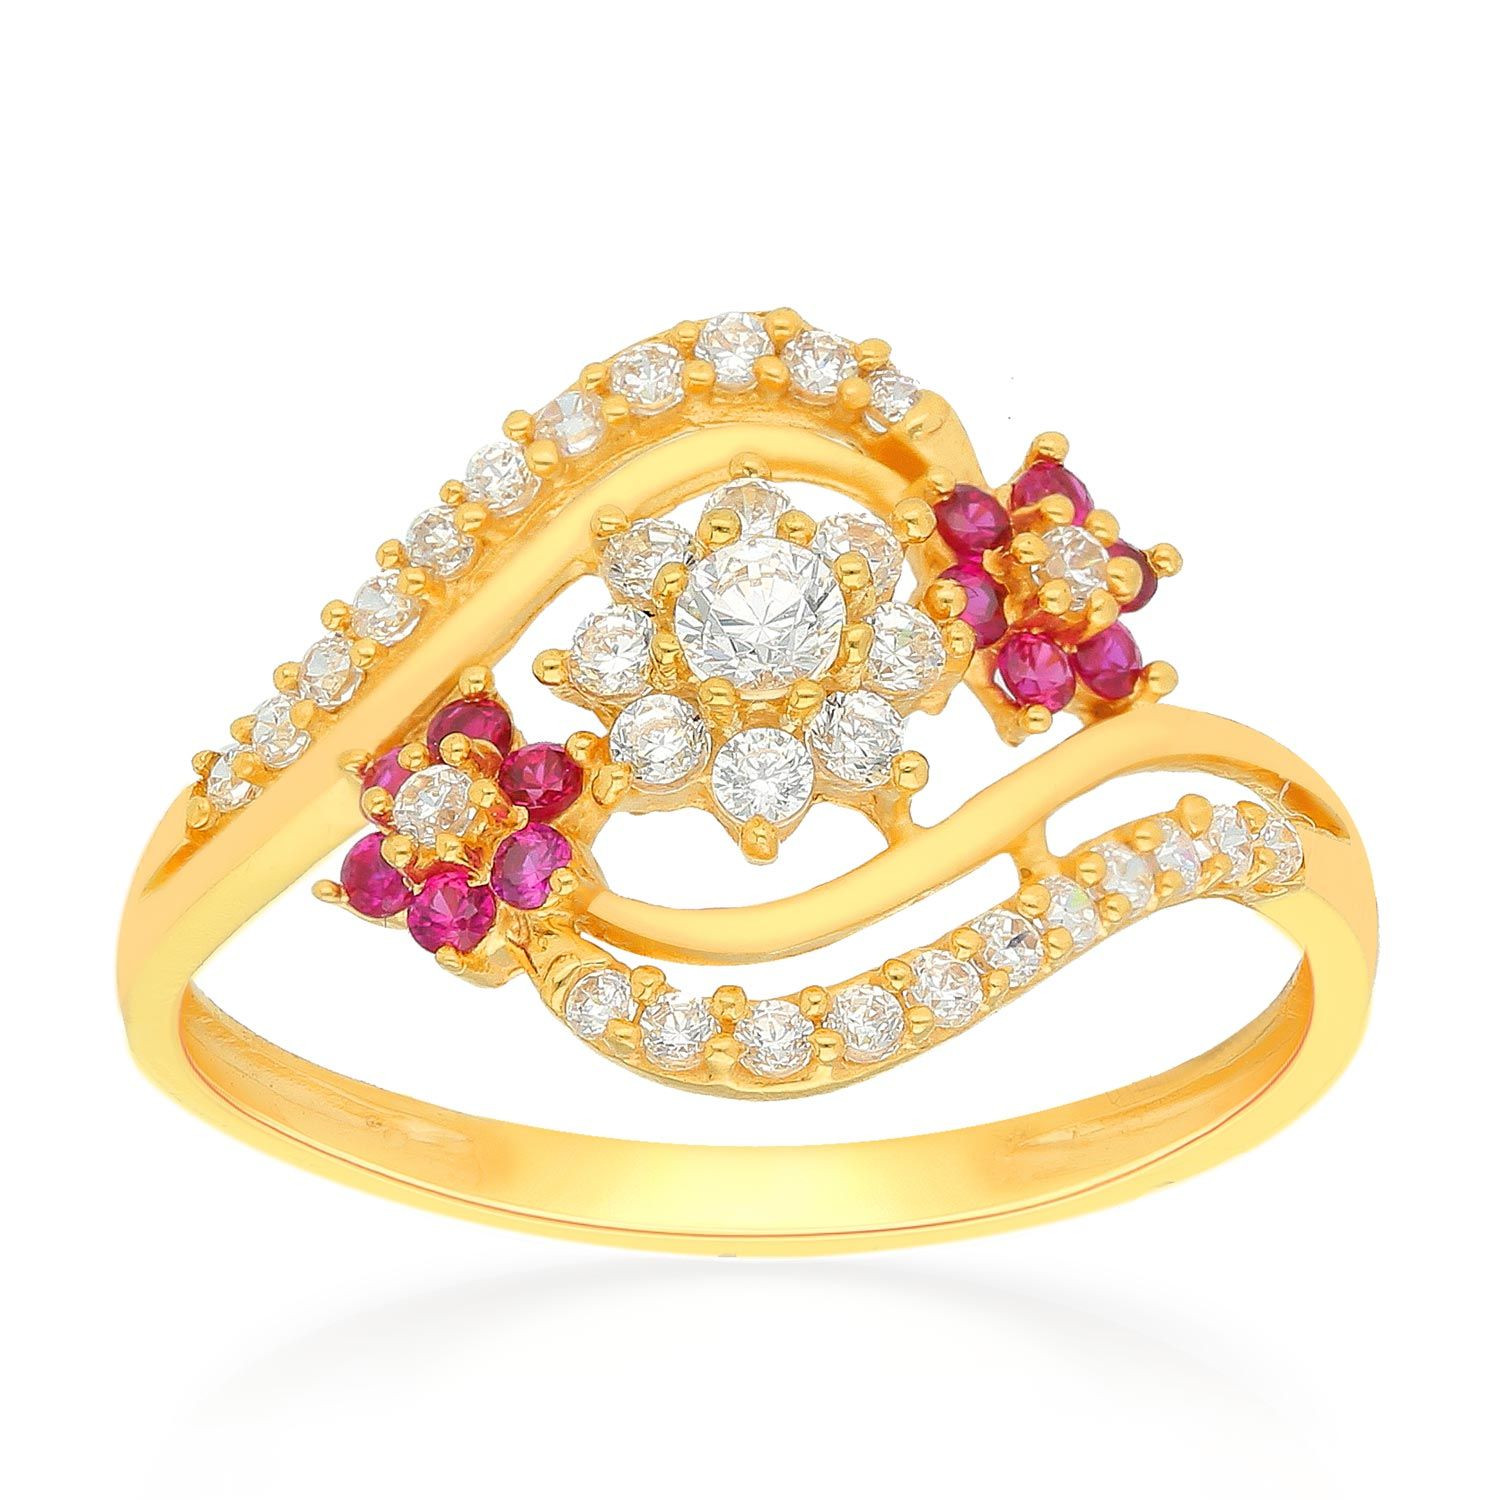 Buy Malabar Gold and Diamonds 22 KT purity Yellow Gold Ring SKYFRDZ087_Y_11  for Women at Amazon.in